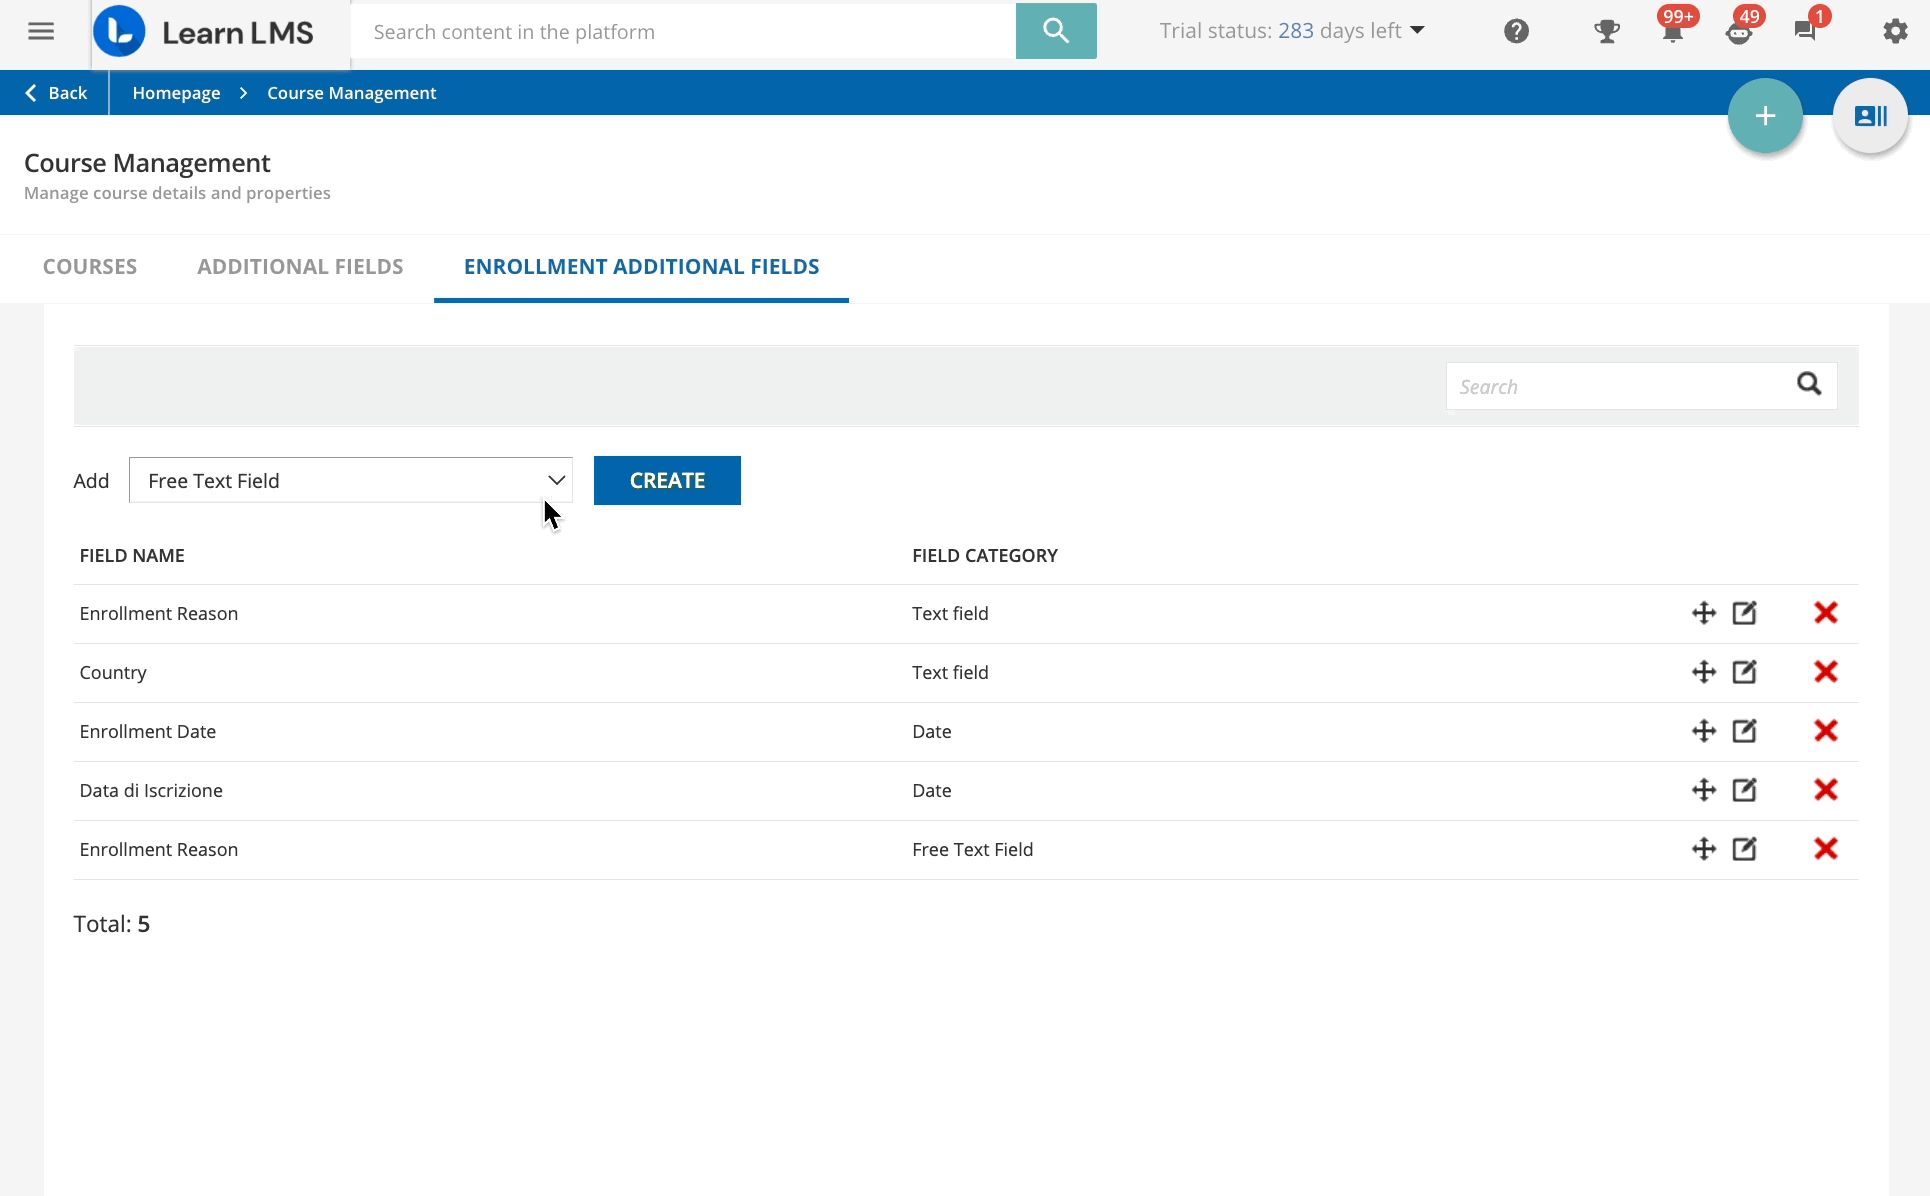 Creating Iframe enrollment additional fields